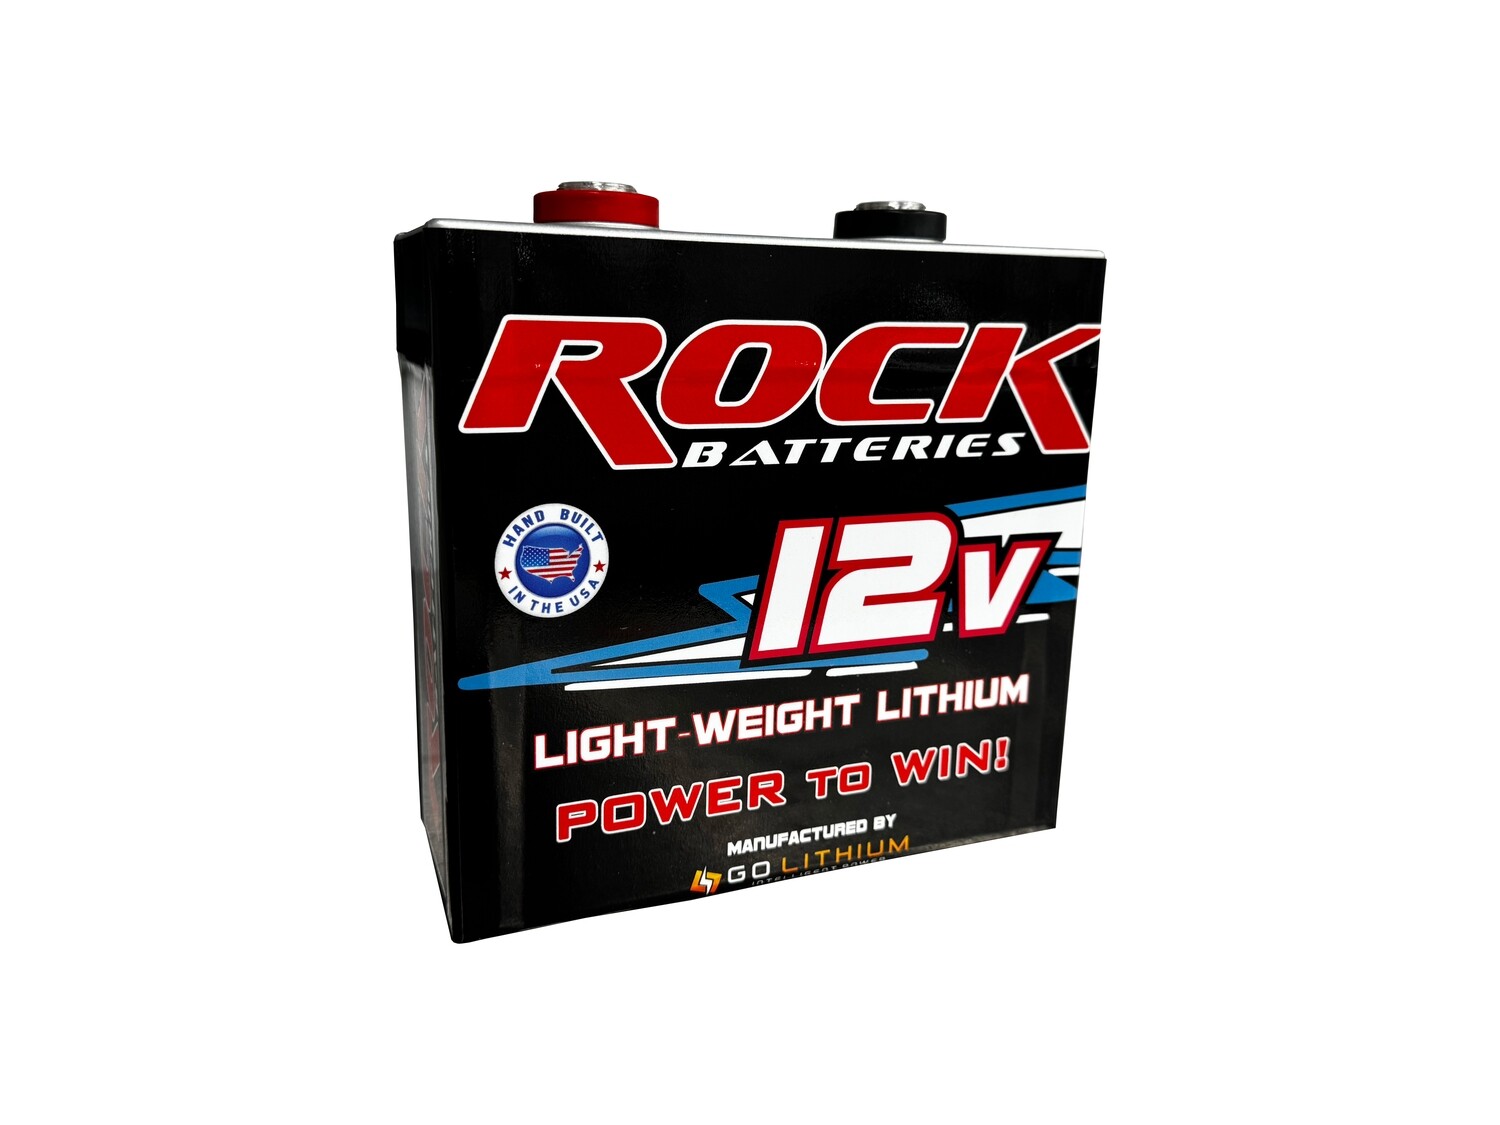 ROCK 12V LIGHT WEIGHT LITHIUM BATTERY
***FREE T-shirt with purchase***